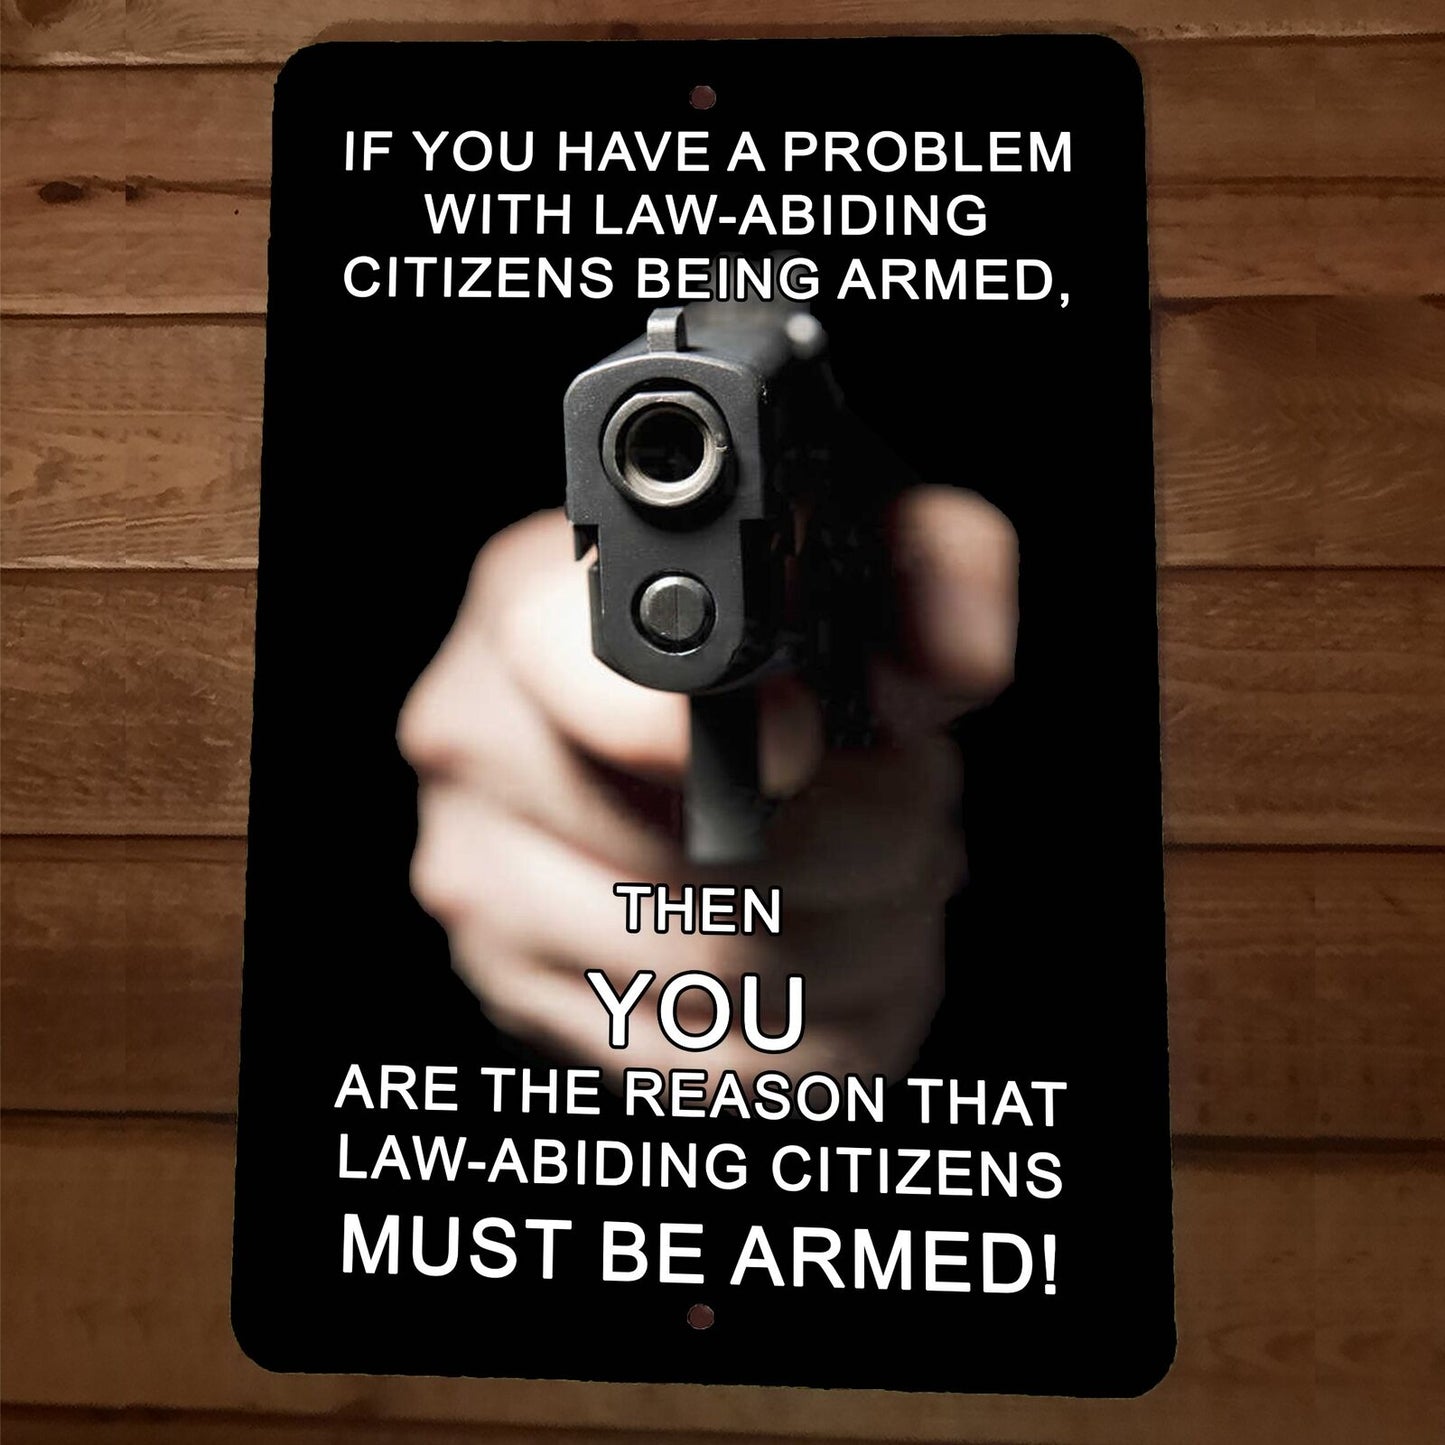 If You Have a Problem with an Armed Citizen 8x12 Metal Wall Sign Poster